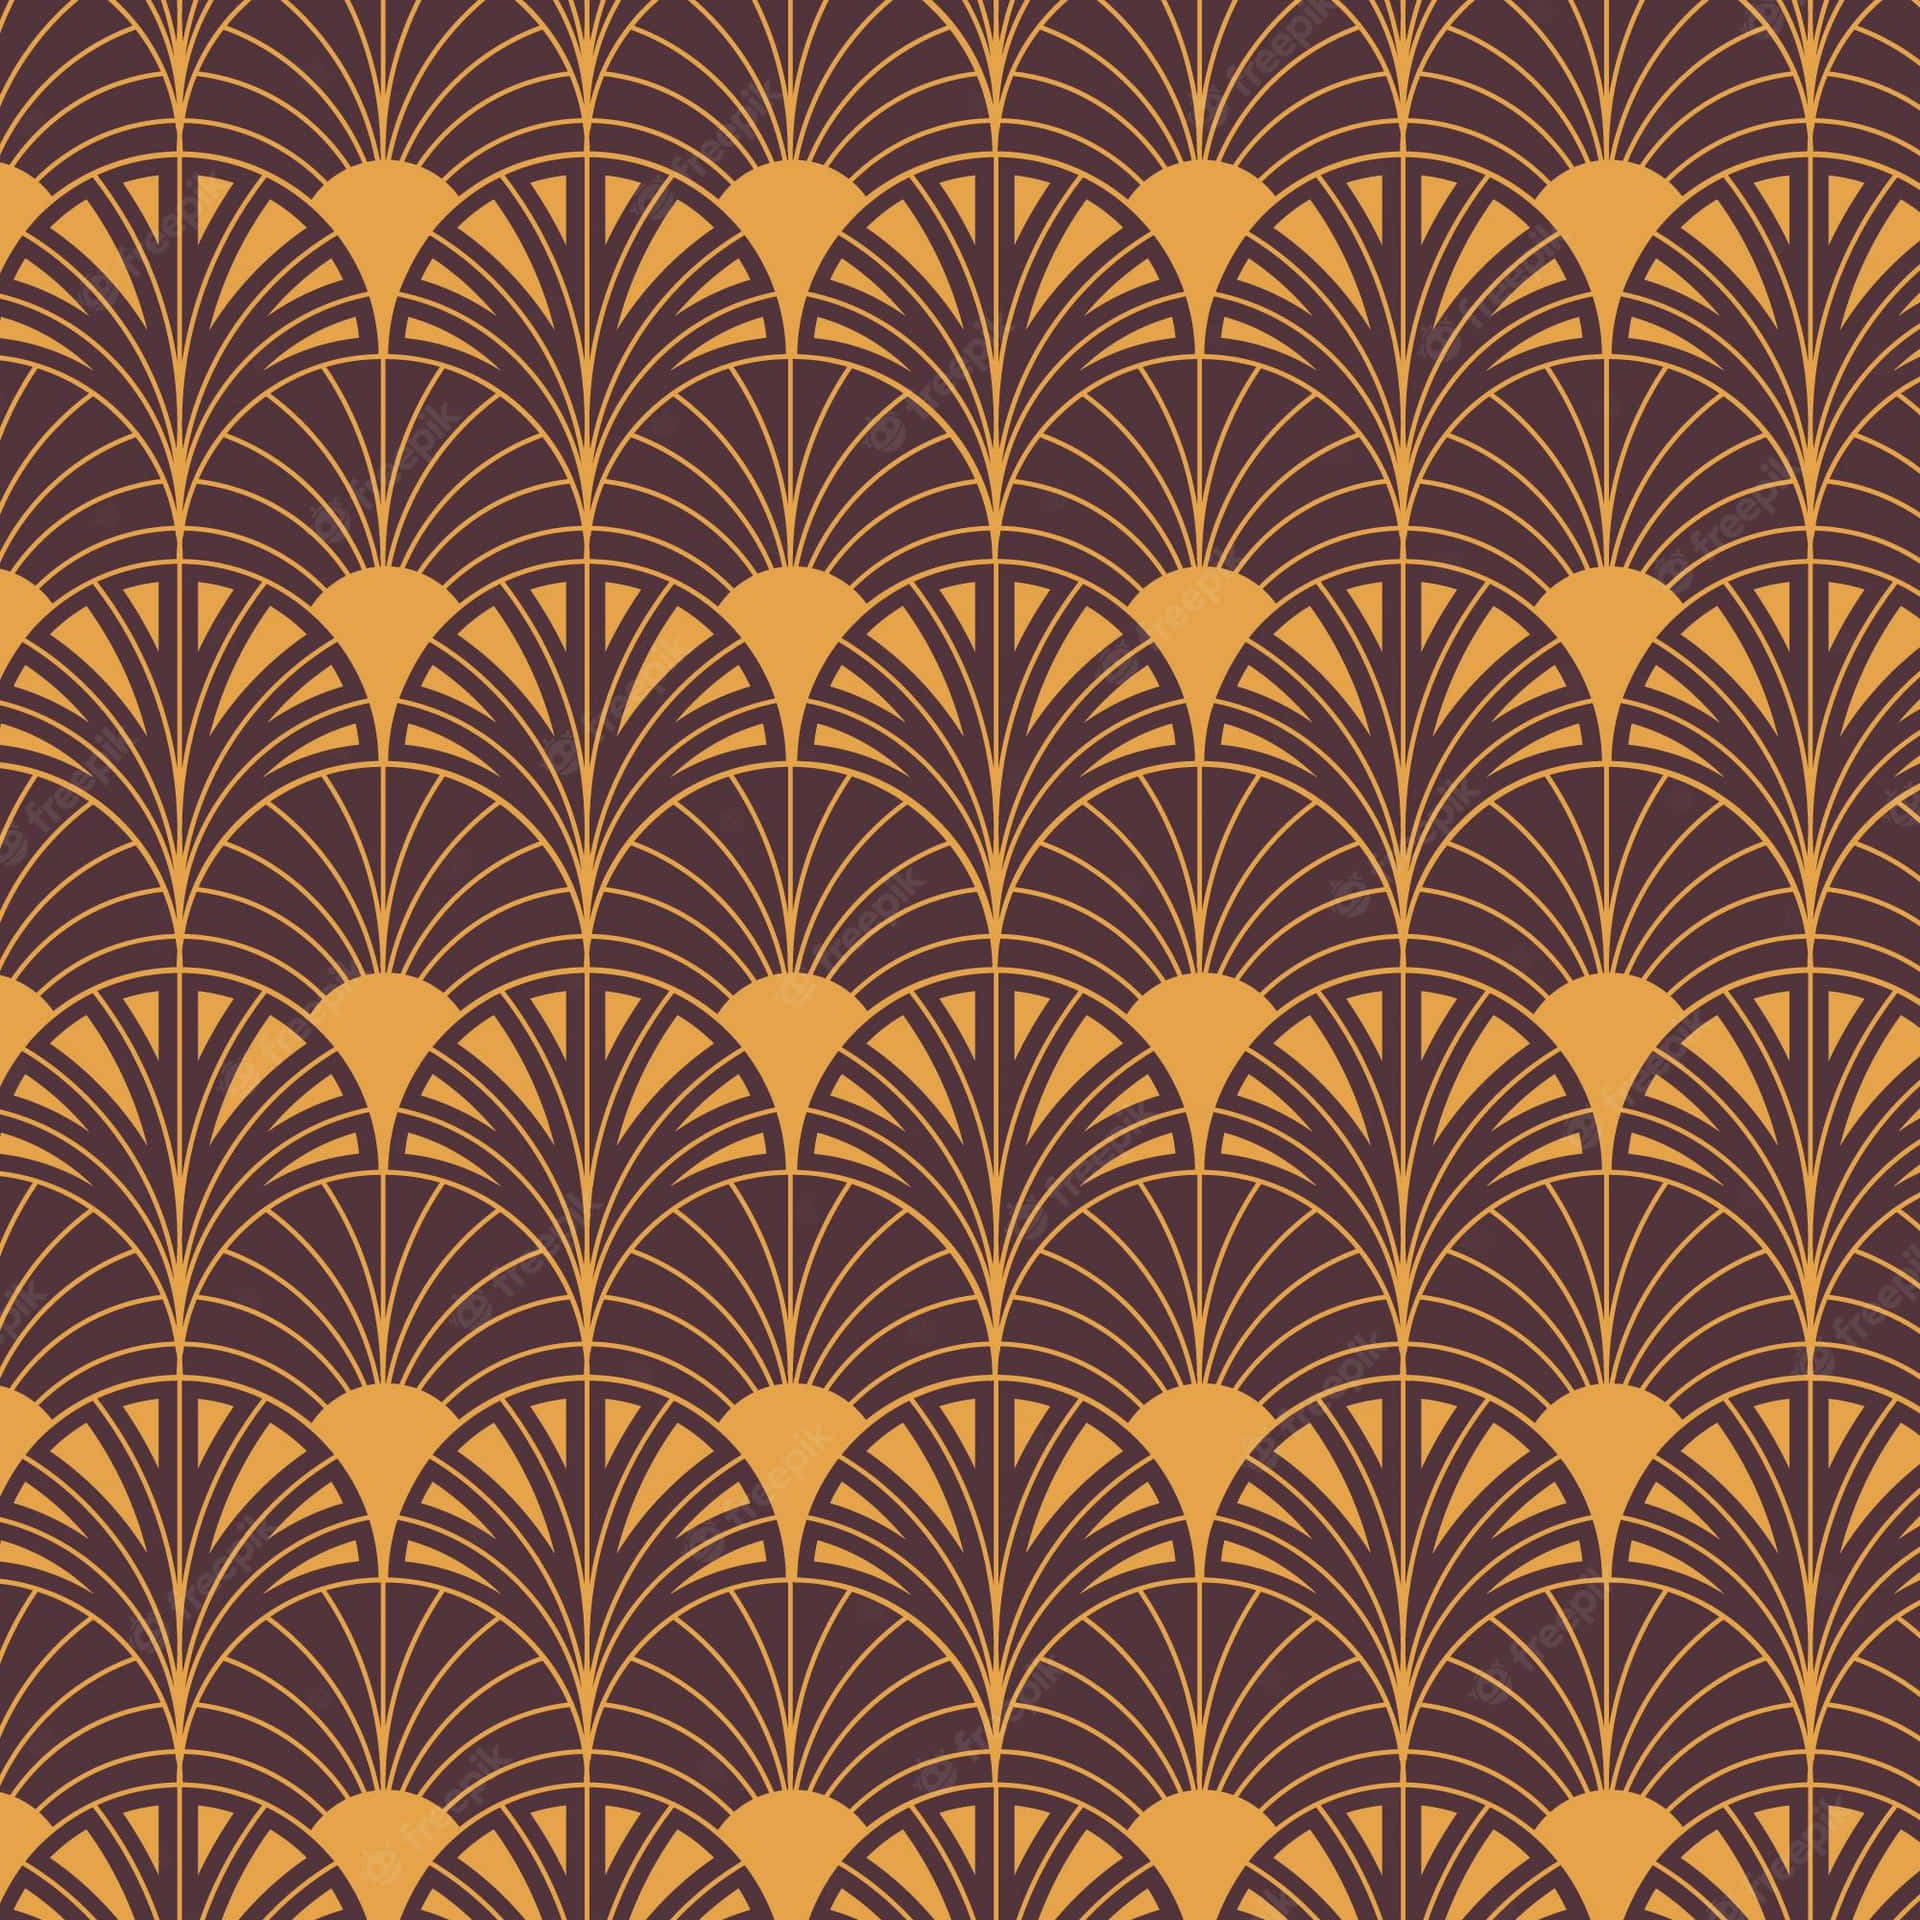 A Pattern With A Fan Design In Brown And Orange Wallpaper